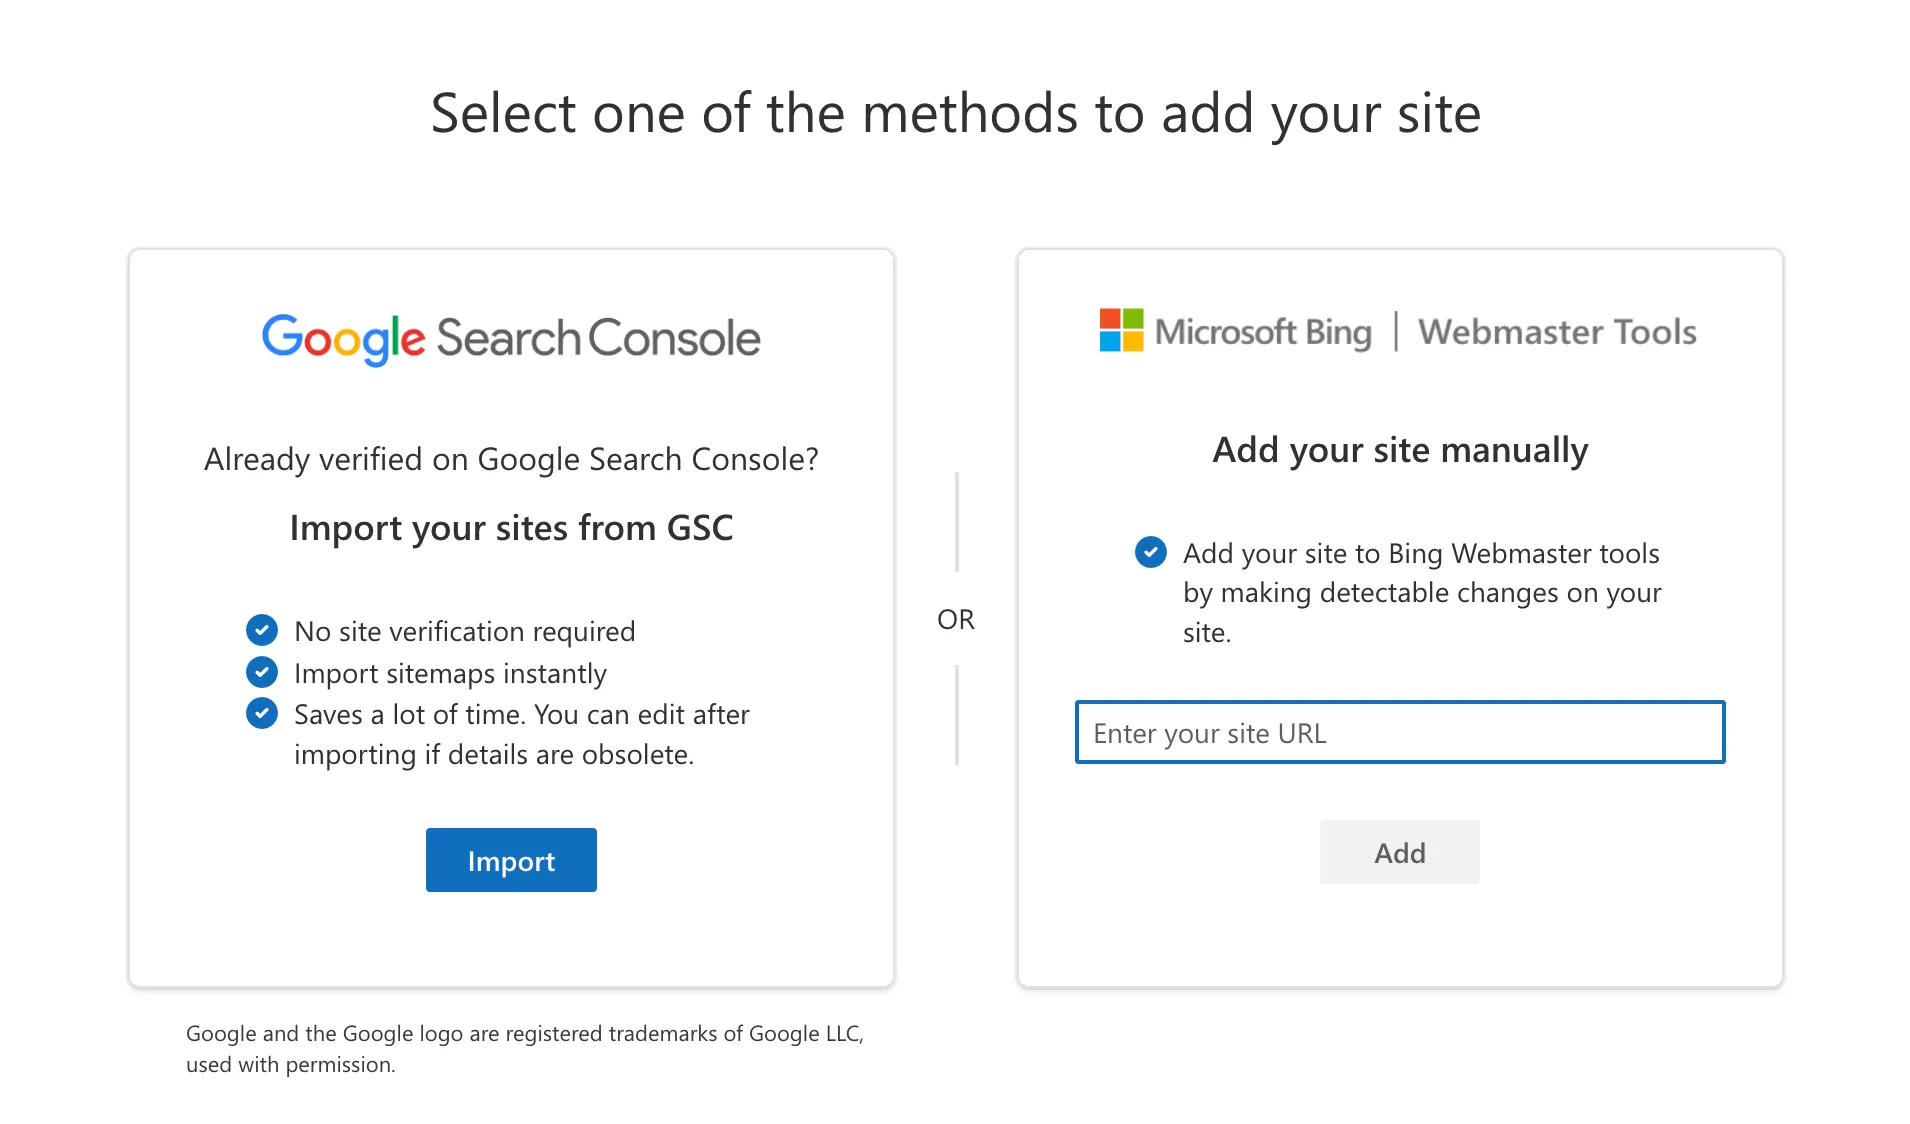 Add website to Bing Webmaster Tools